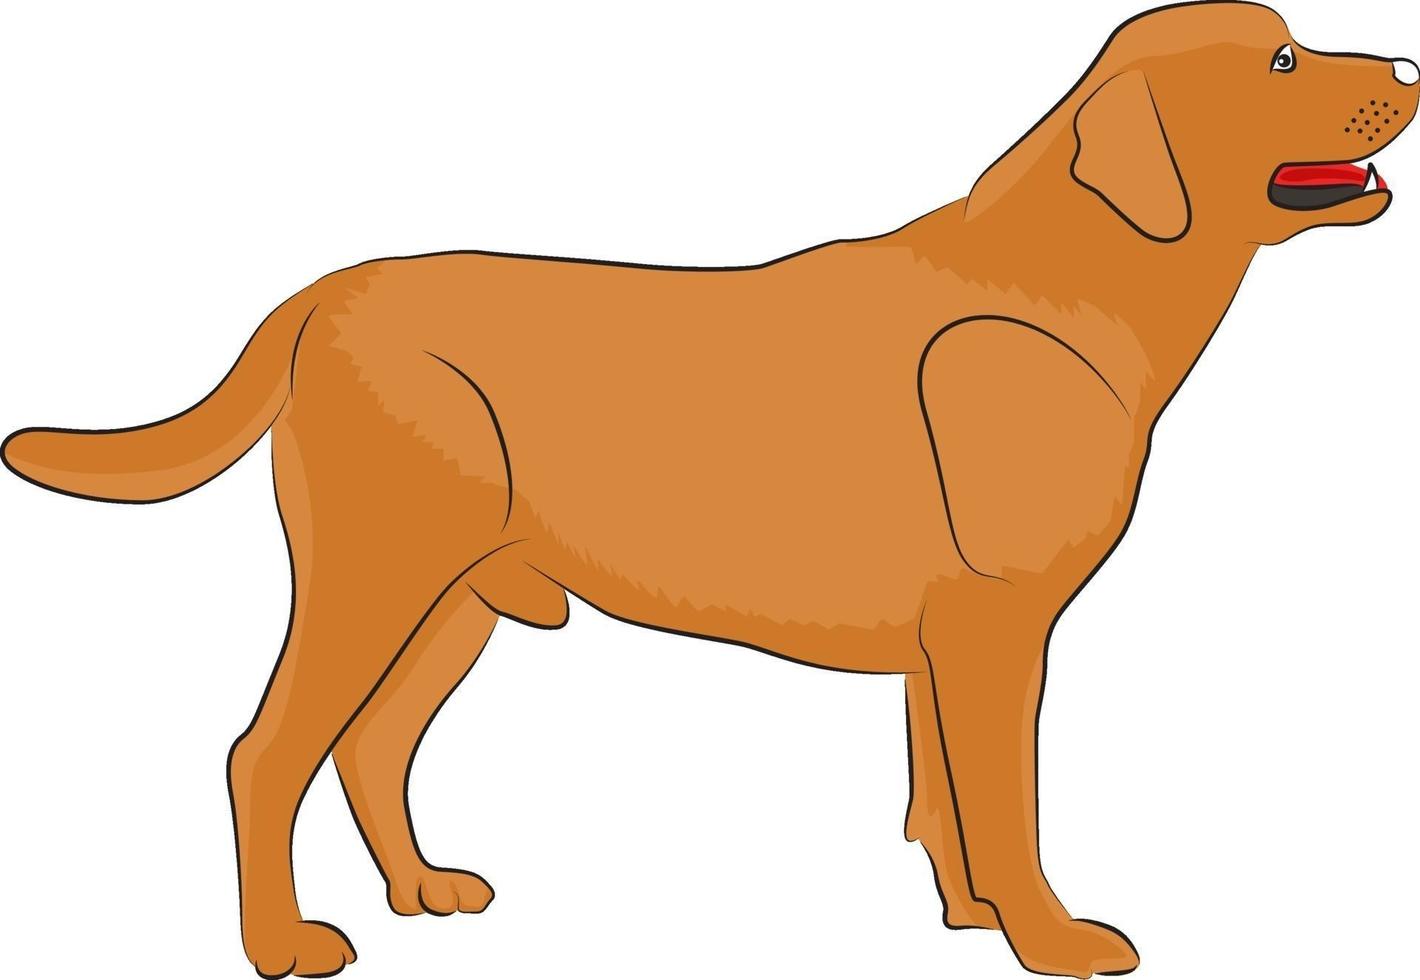 Brown dog, illustration, vector on a white background.